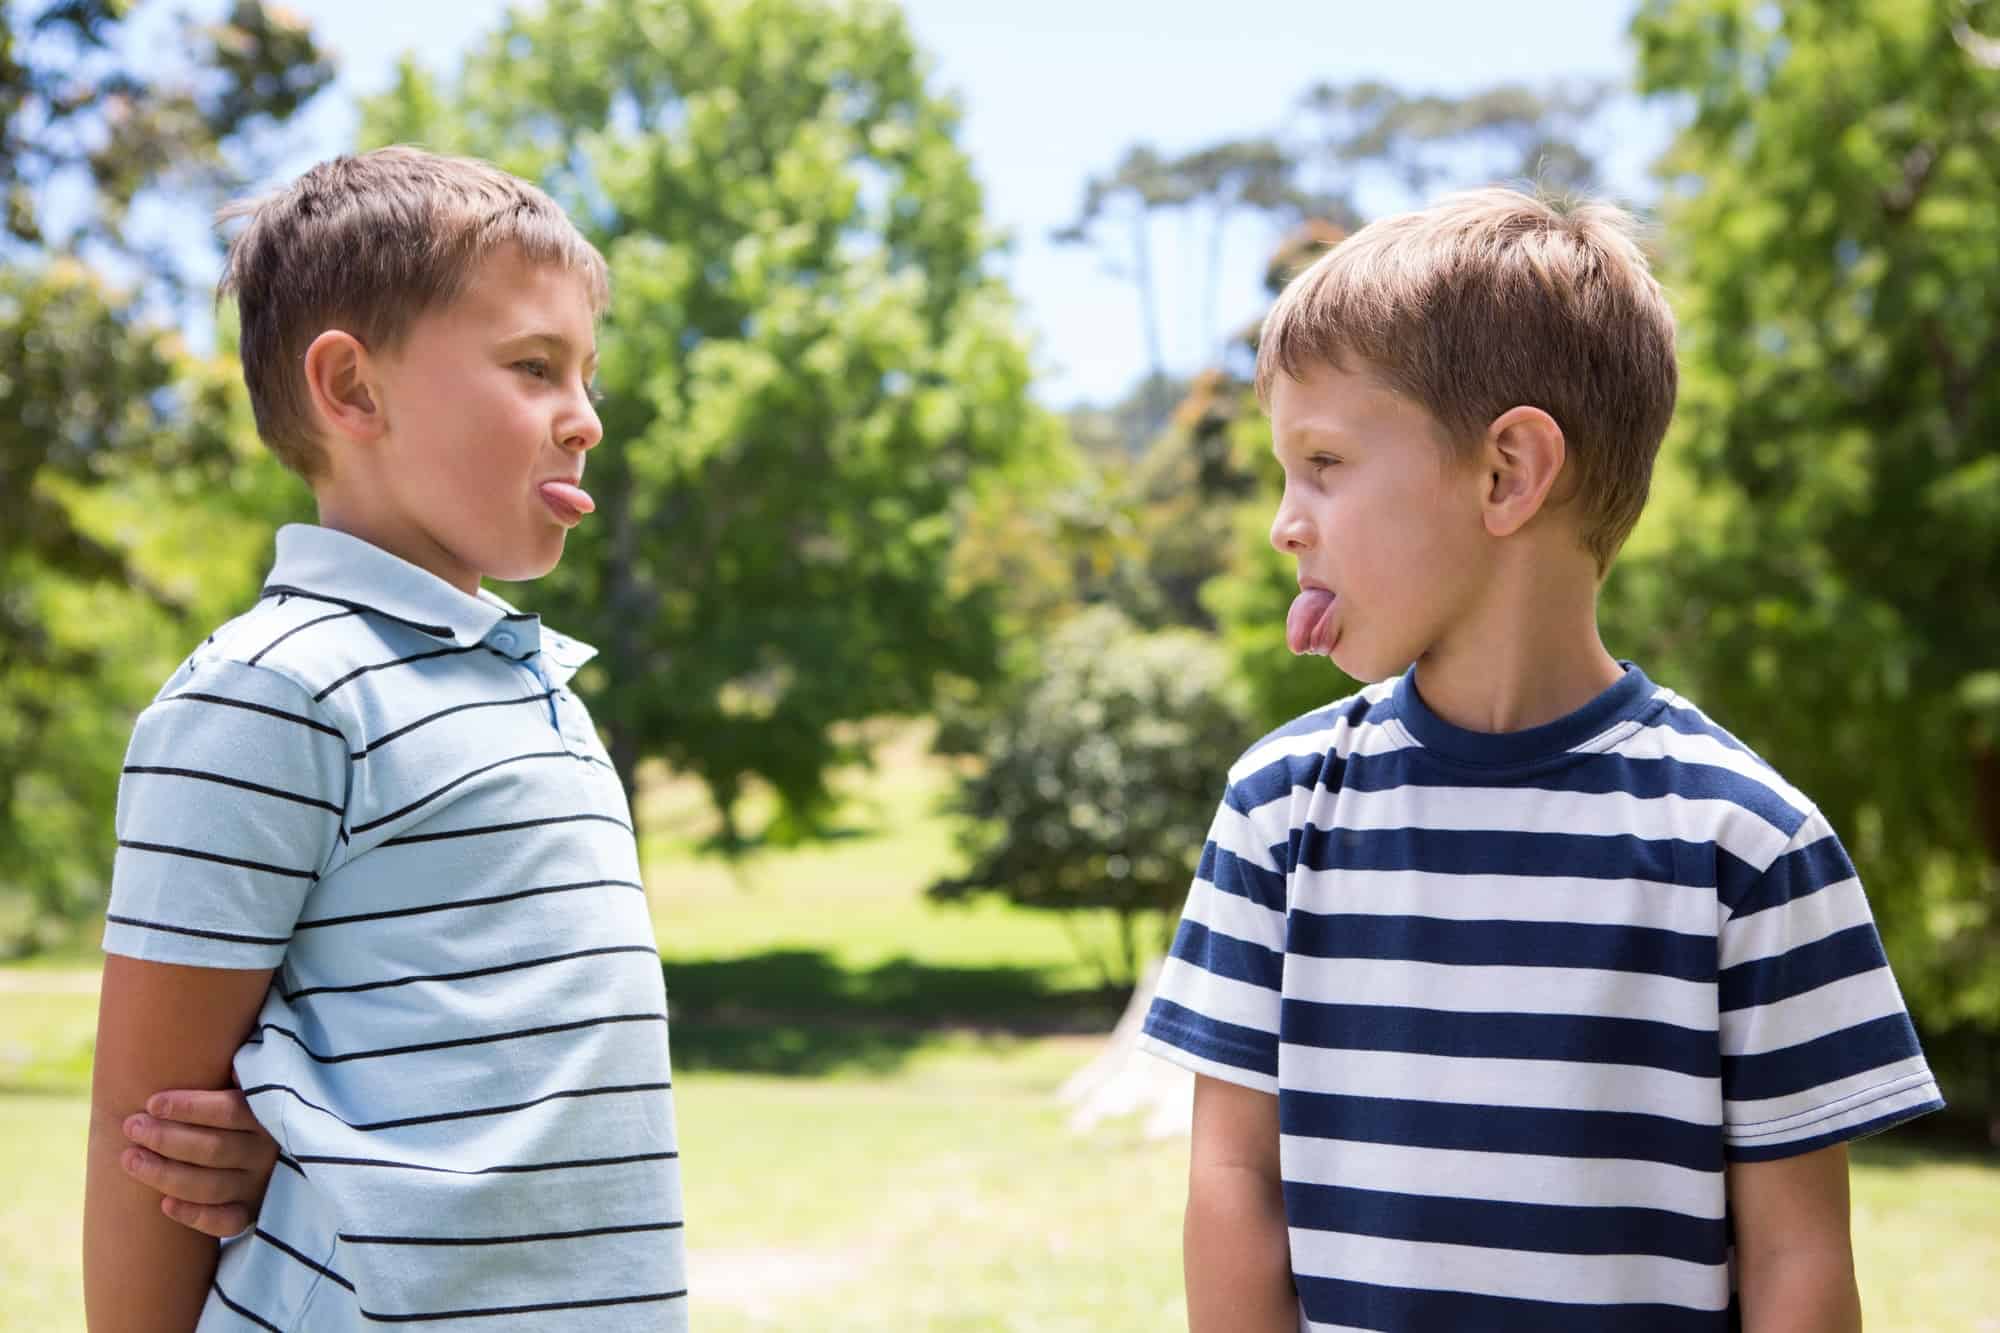 Two brothers engaged in a sticking out their tongue war. Discover 4 simple strategies to end sibling rivalry for good. And for more parenting tips and kid inspiration, follow Made In A Pinch on Pinterest!